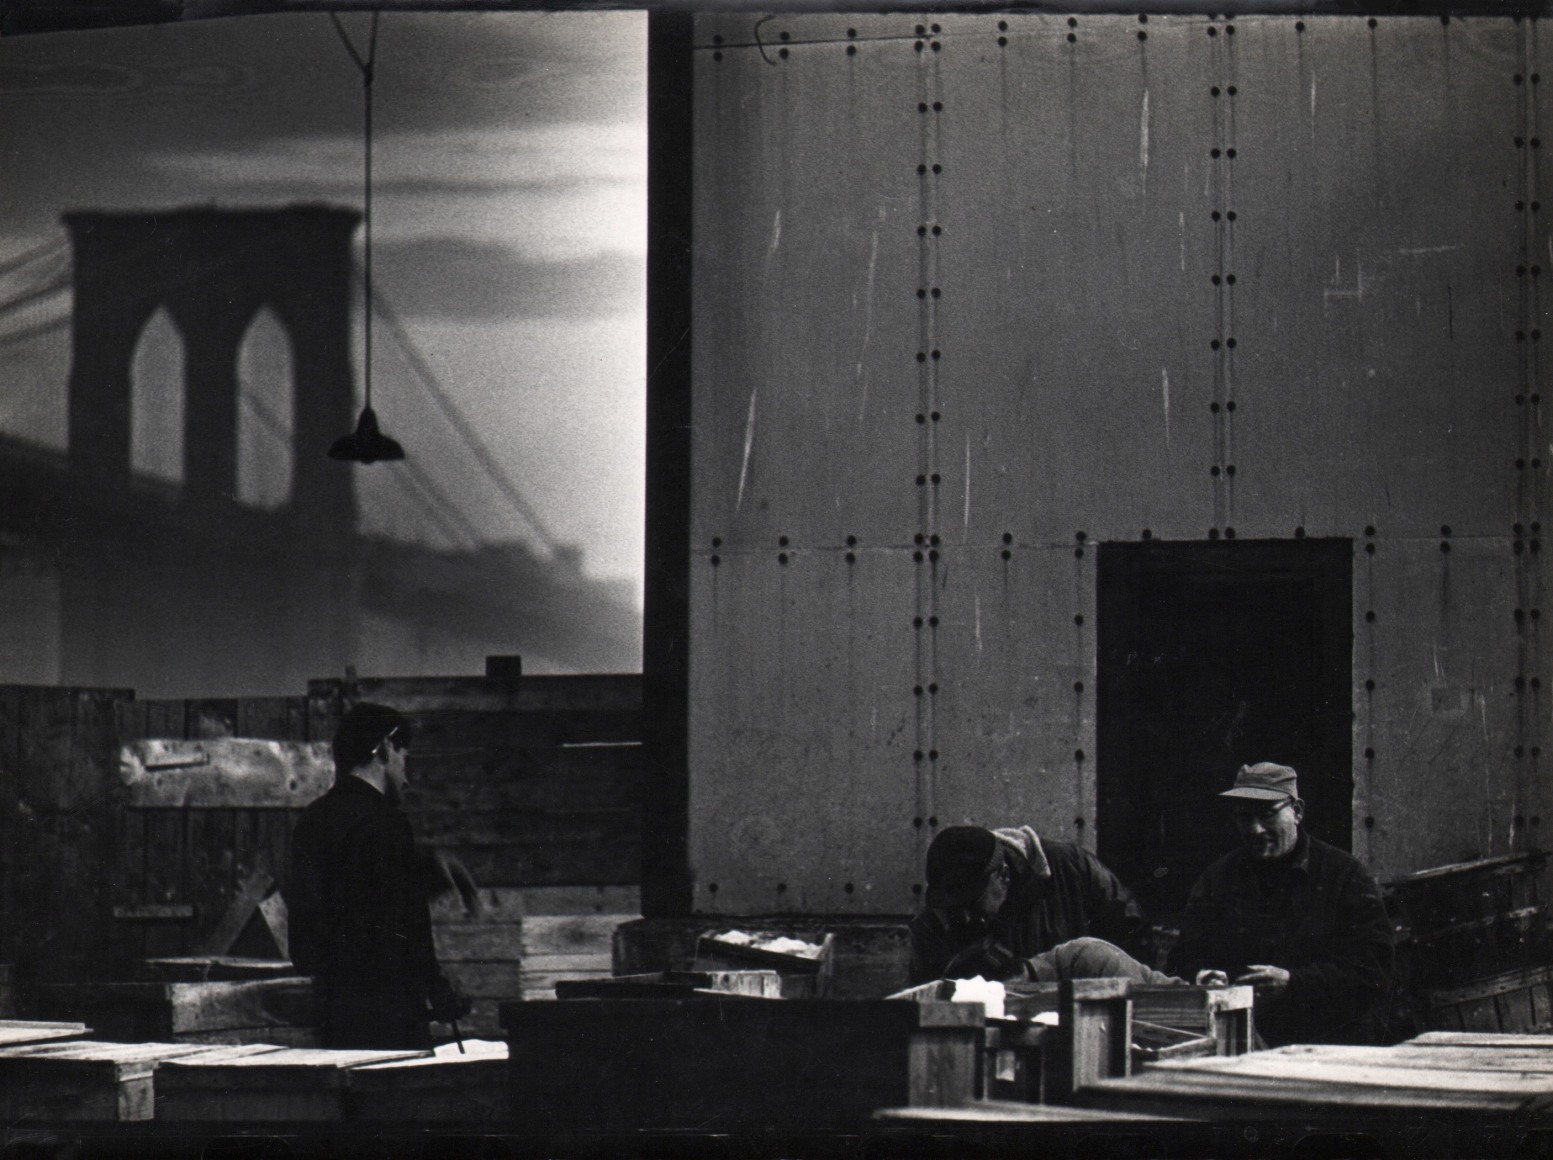 12. Jan Lukas, New York, Fulton Fishmarket, ​1964. Three men standing in front of a metal structure. The Brooklyn Bridge is seen in the background left.